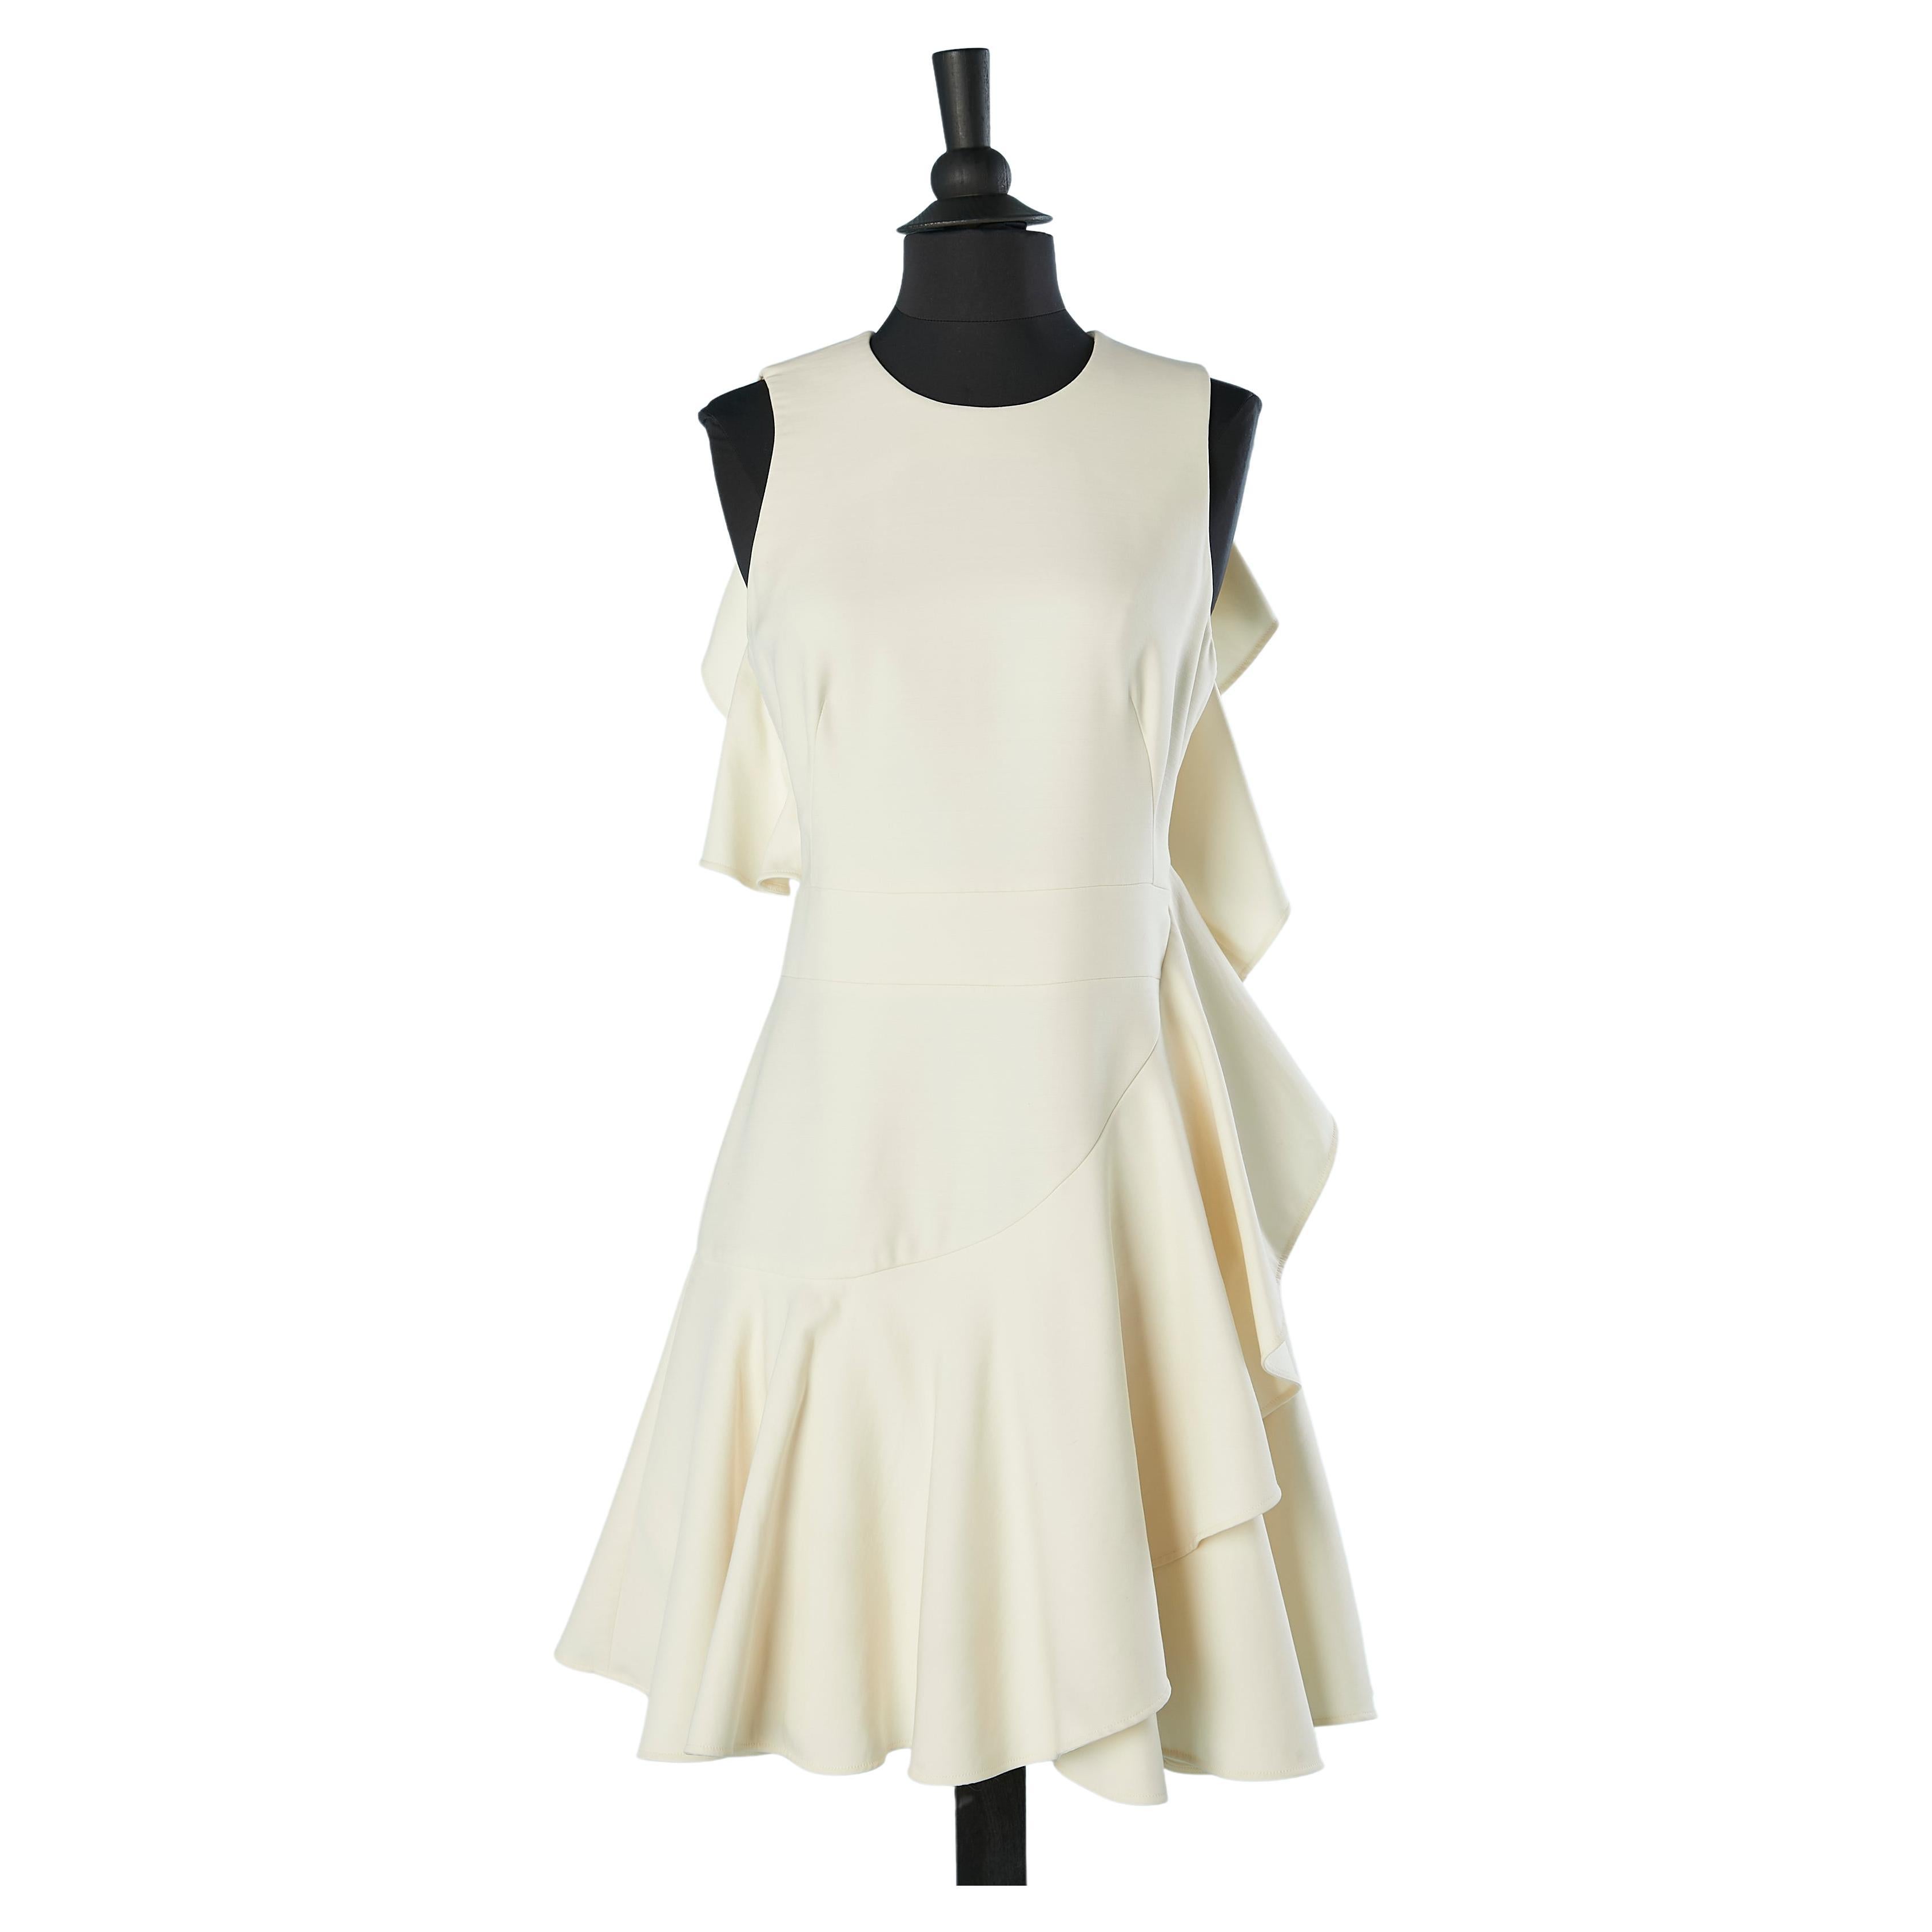 Off-white asymmetrical cocktail dress with ruffles Alexander McQueen  For Sale